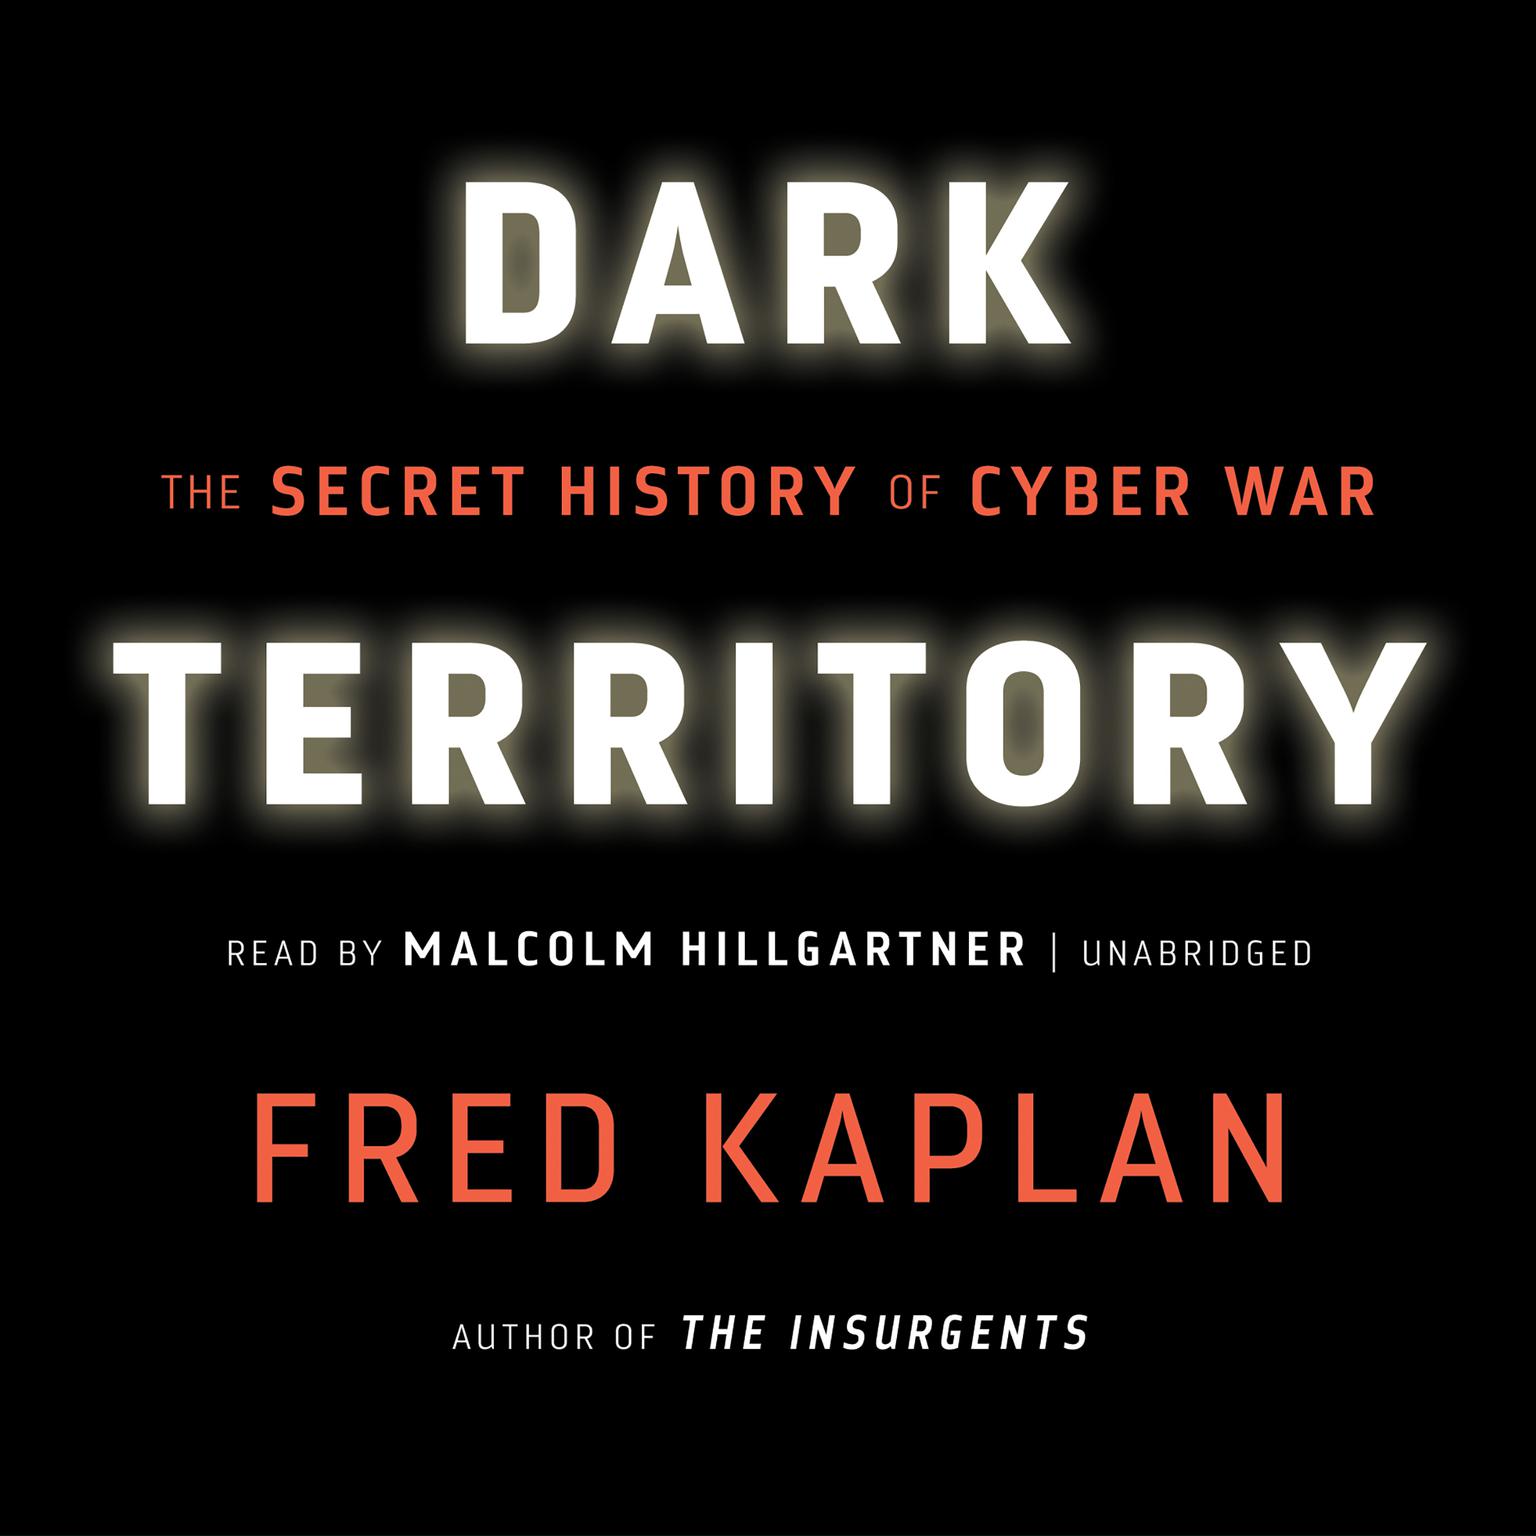 Dark Territory: The Secret History of Cyber War Audiobook, by Fred Kaplan